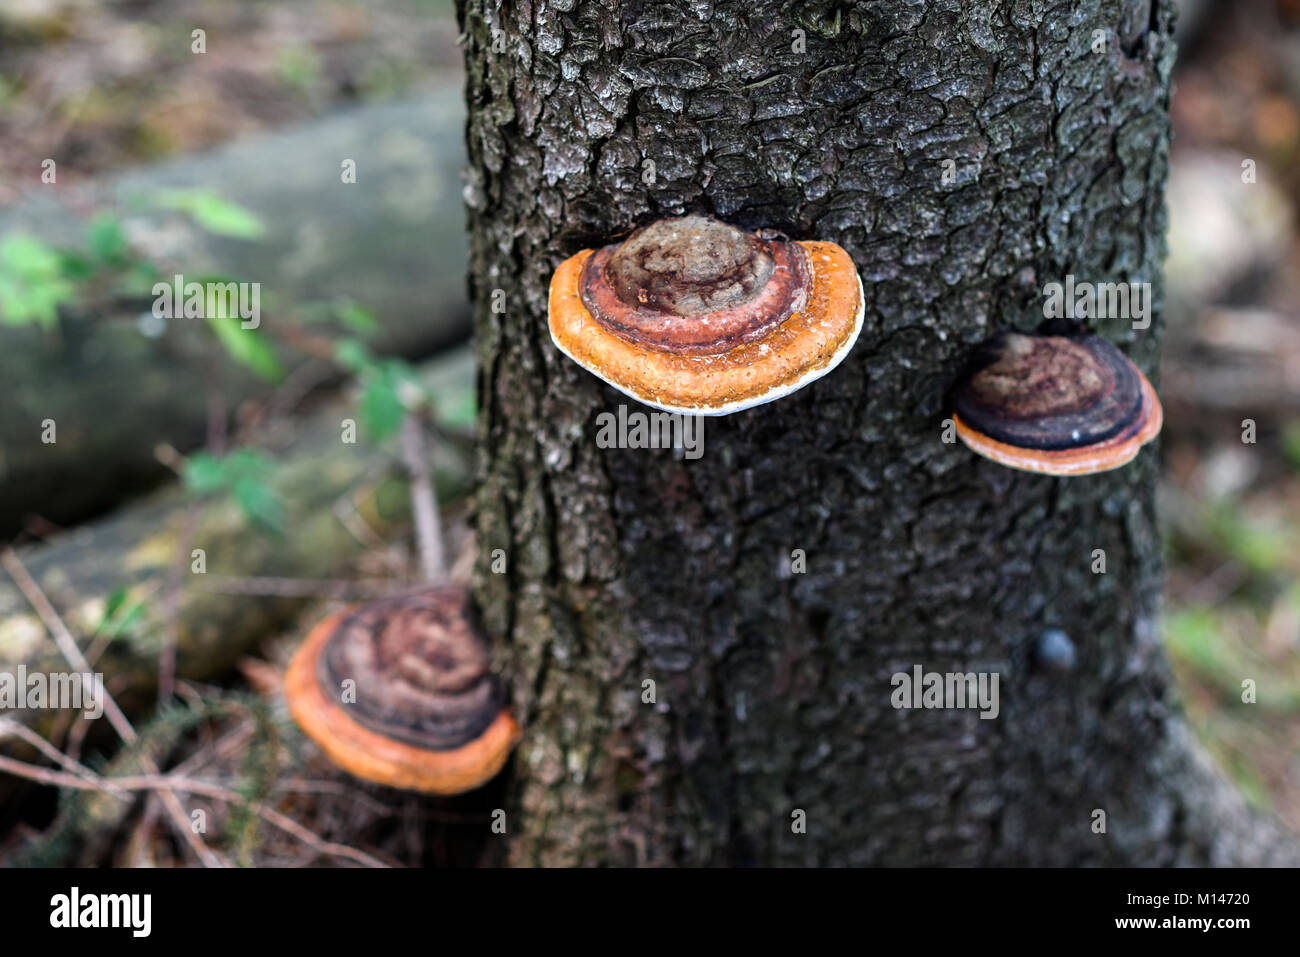 Pinicola growing on a tree in the forest, autumn season. Stock Photo